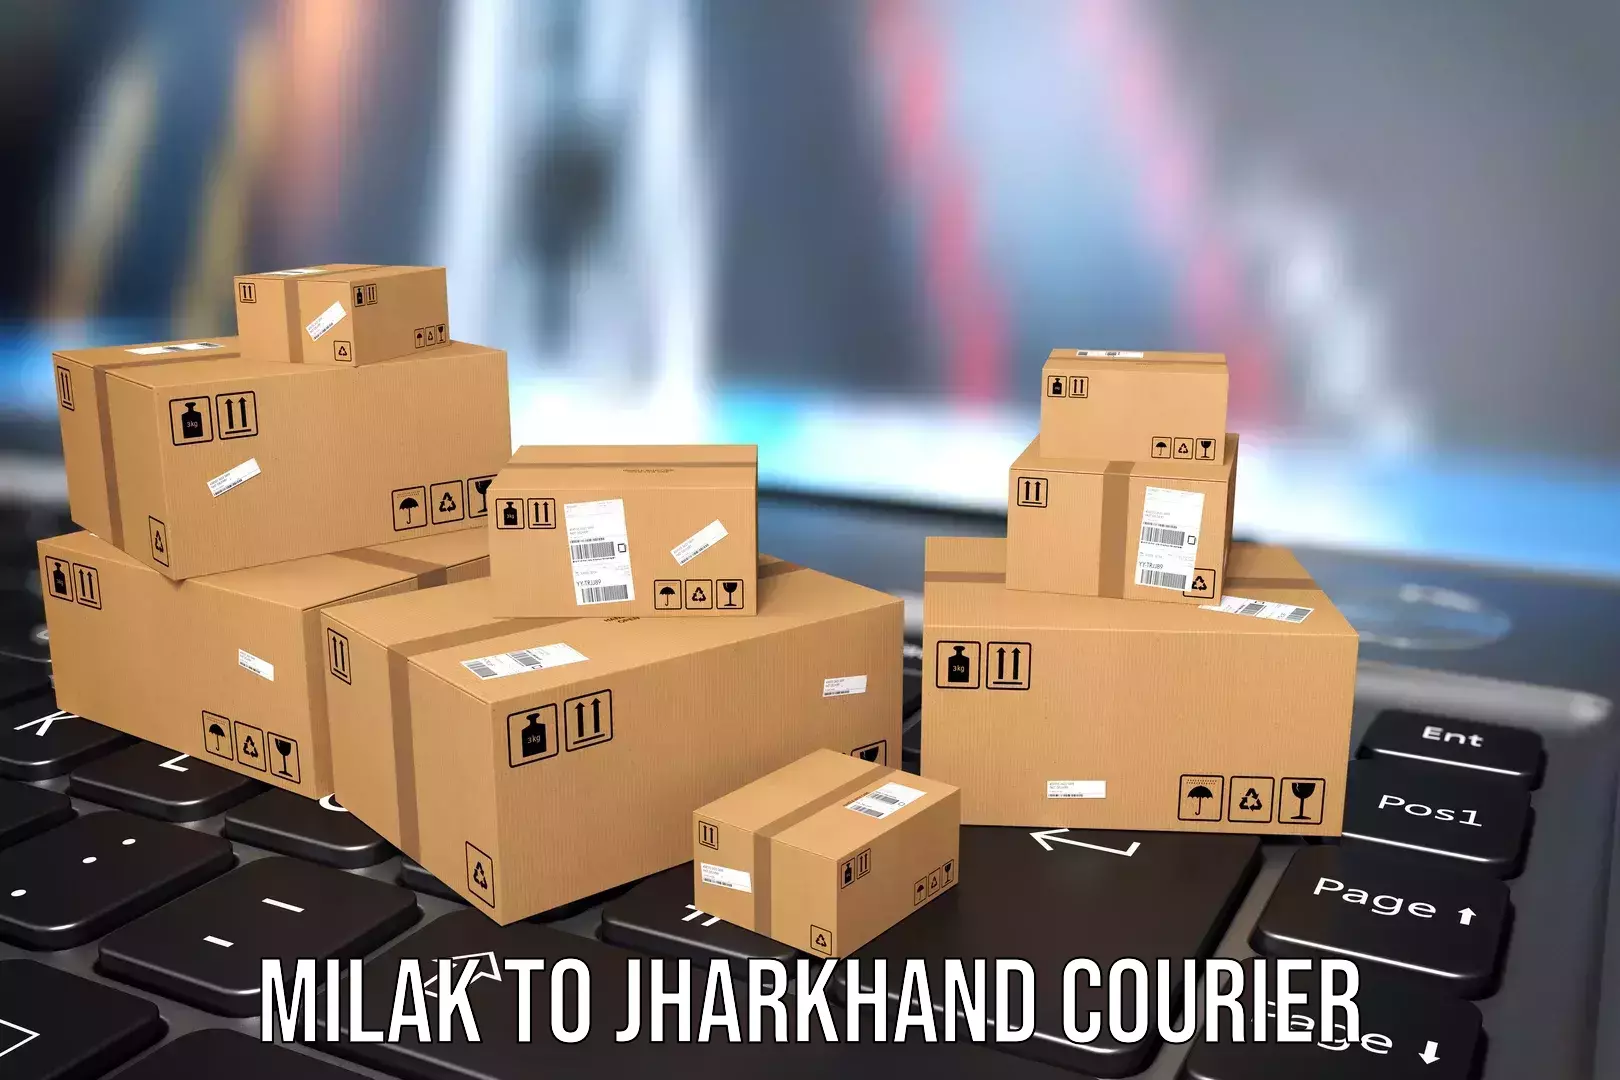 Luggage shipment specialists Milak to Jharkhand